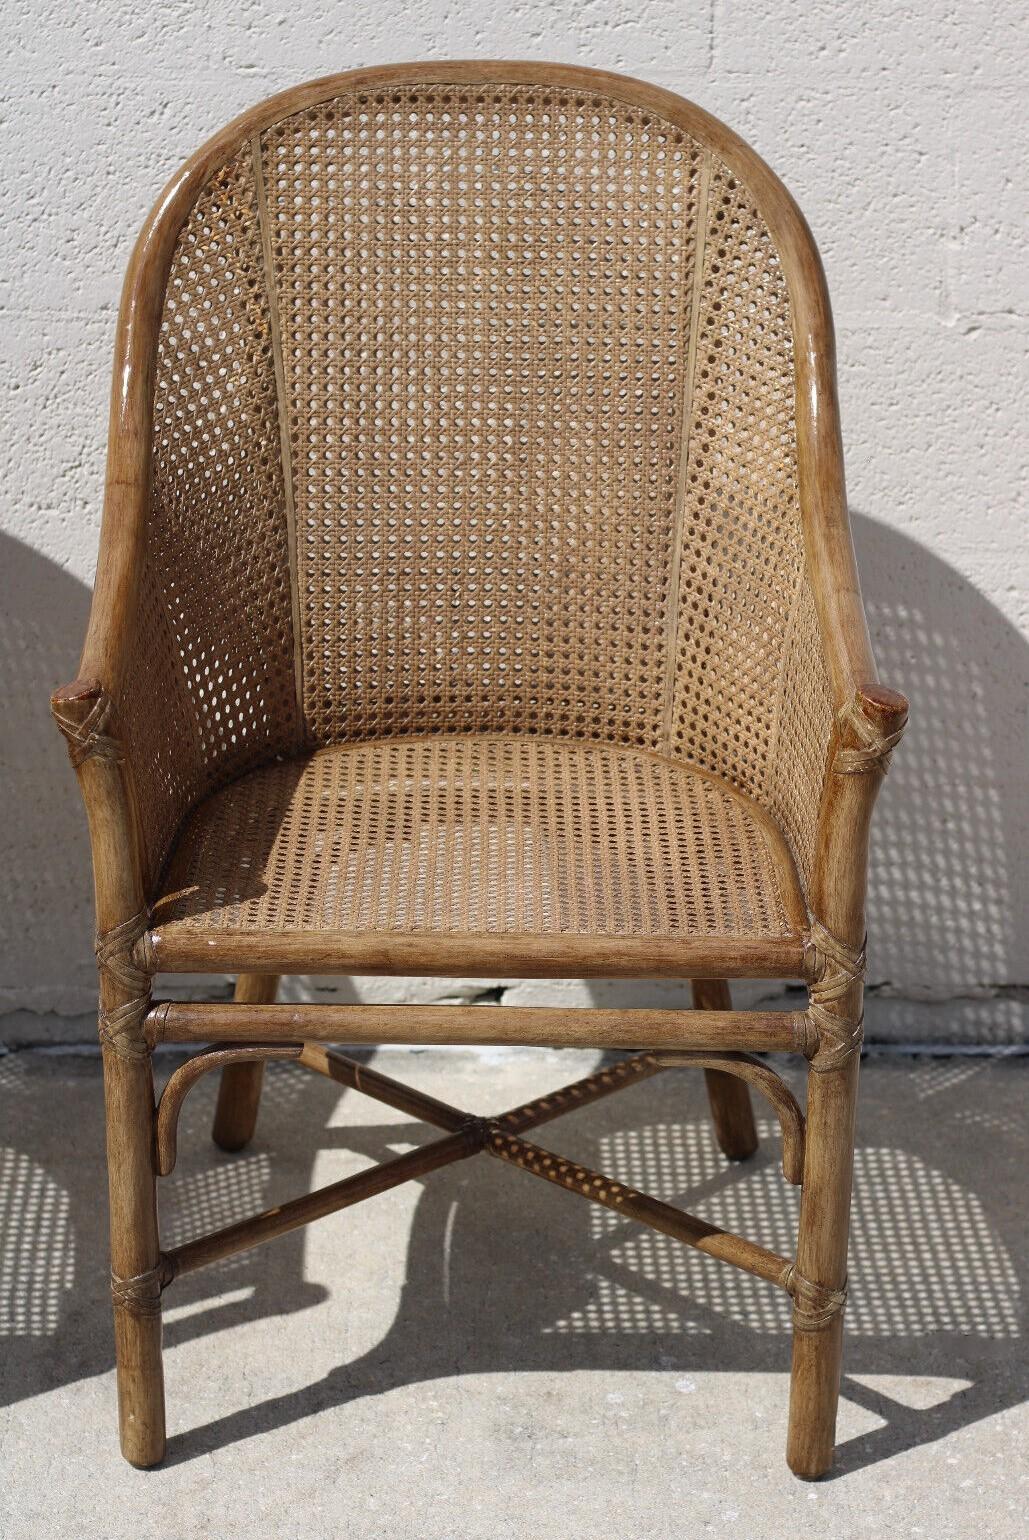 Elinor McGuire Rattan Caned Barrel Back Arm Chairs, a Pair For Sale 1